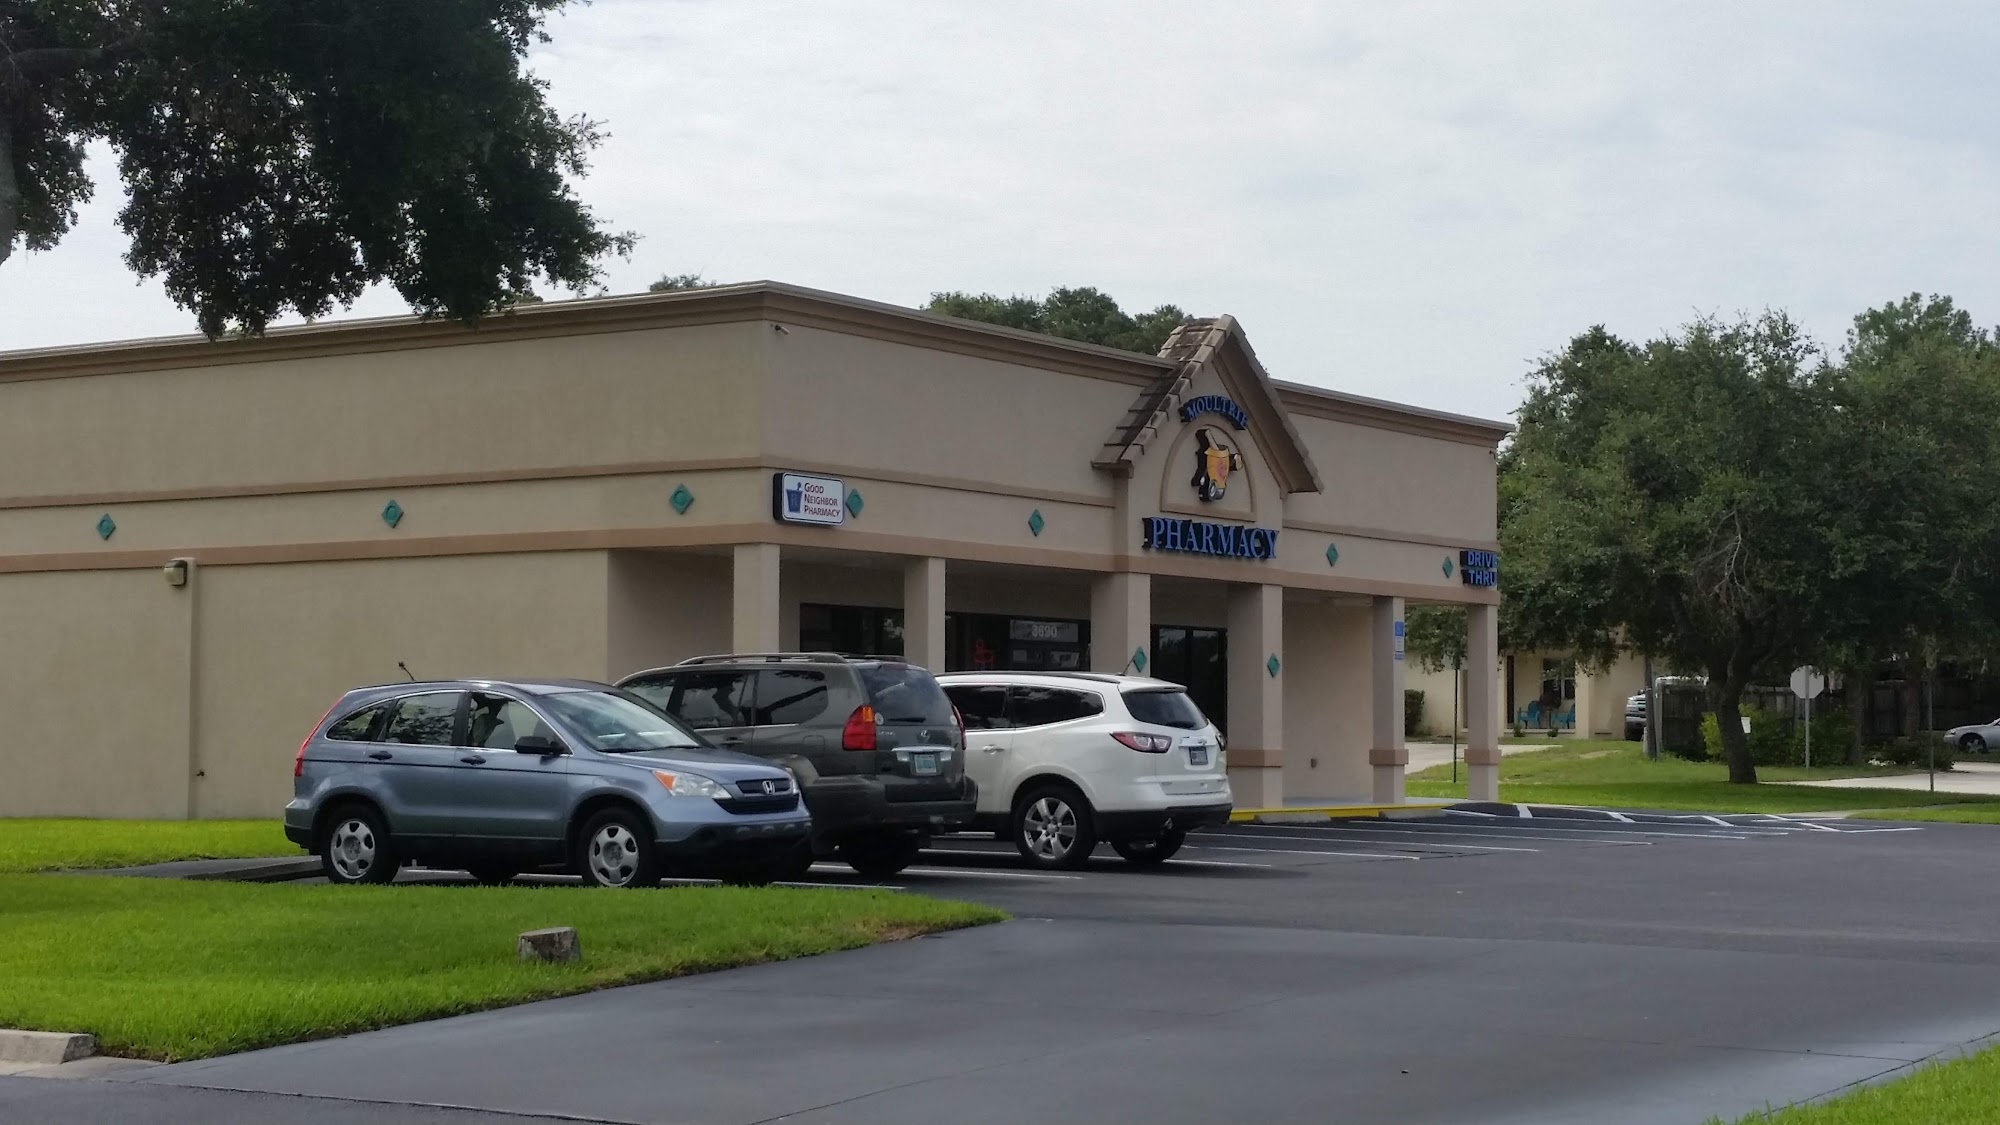 Moultrie Pharmacy